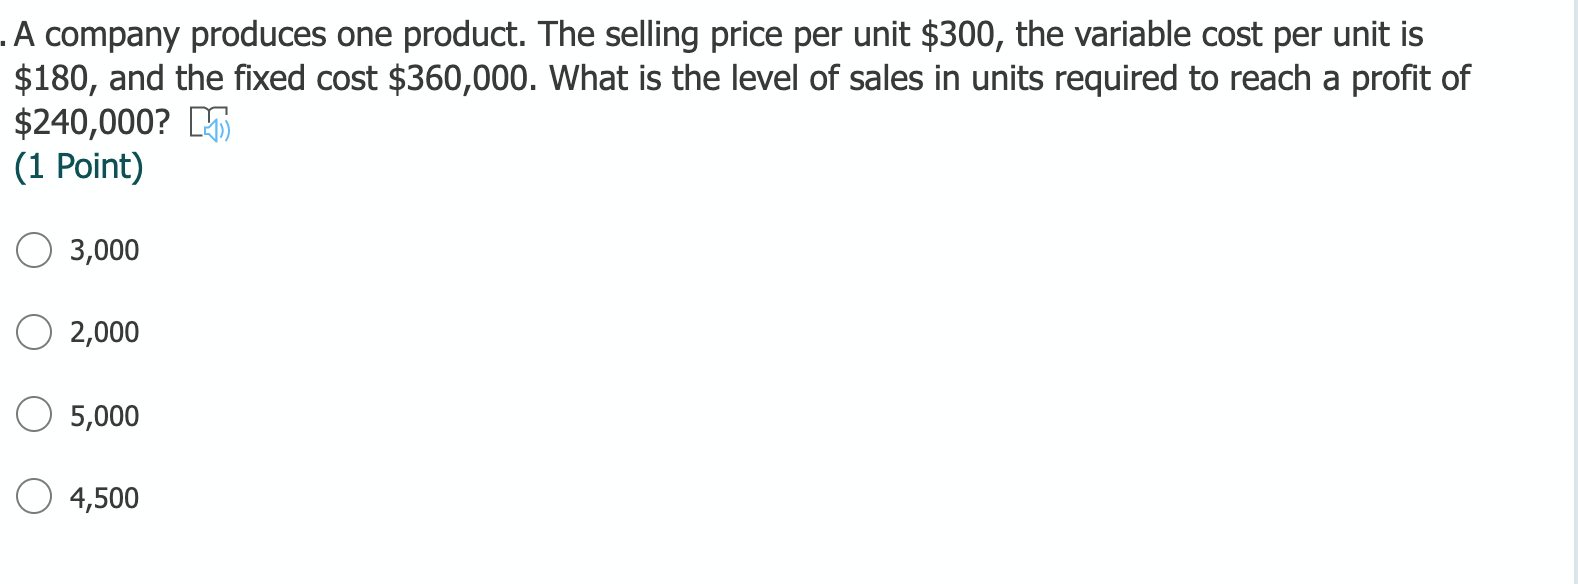 .A company produces one product. The selling price per unit $300, the variable cost per unit is$180, and the fixed cost $360